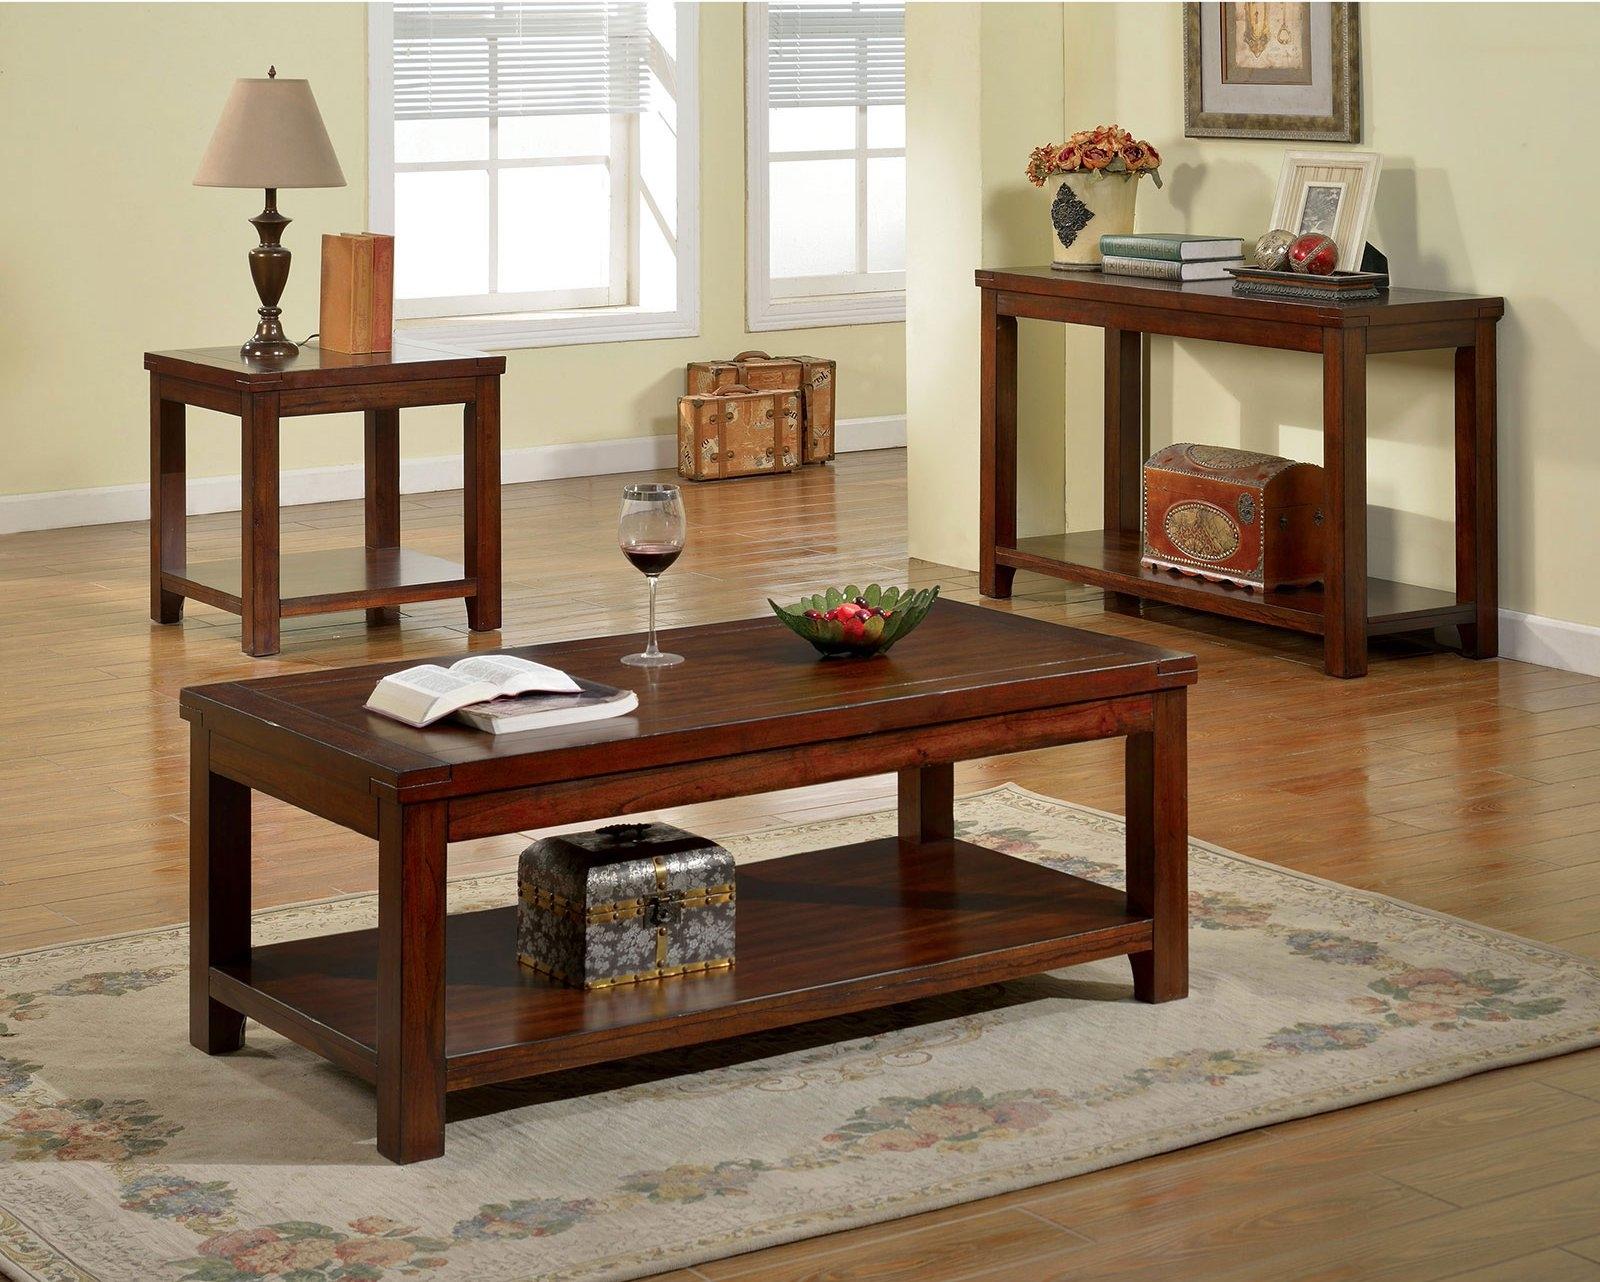 Transitional Coffee Table and 2 End Tables CM4107C-3PC Estell CM4107C-3PC in Dark Cherry 